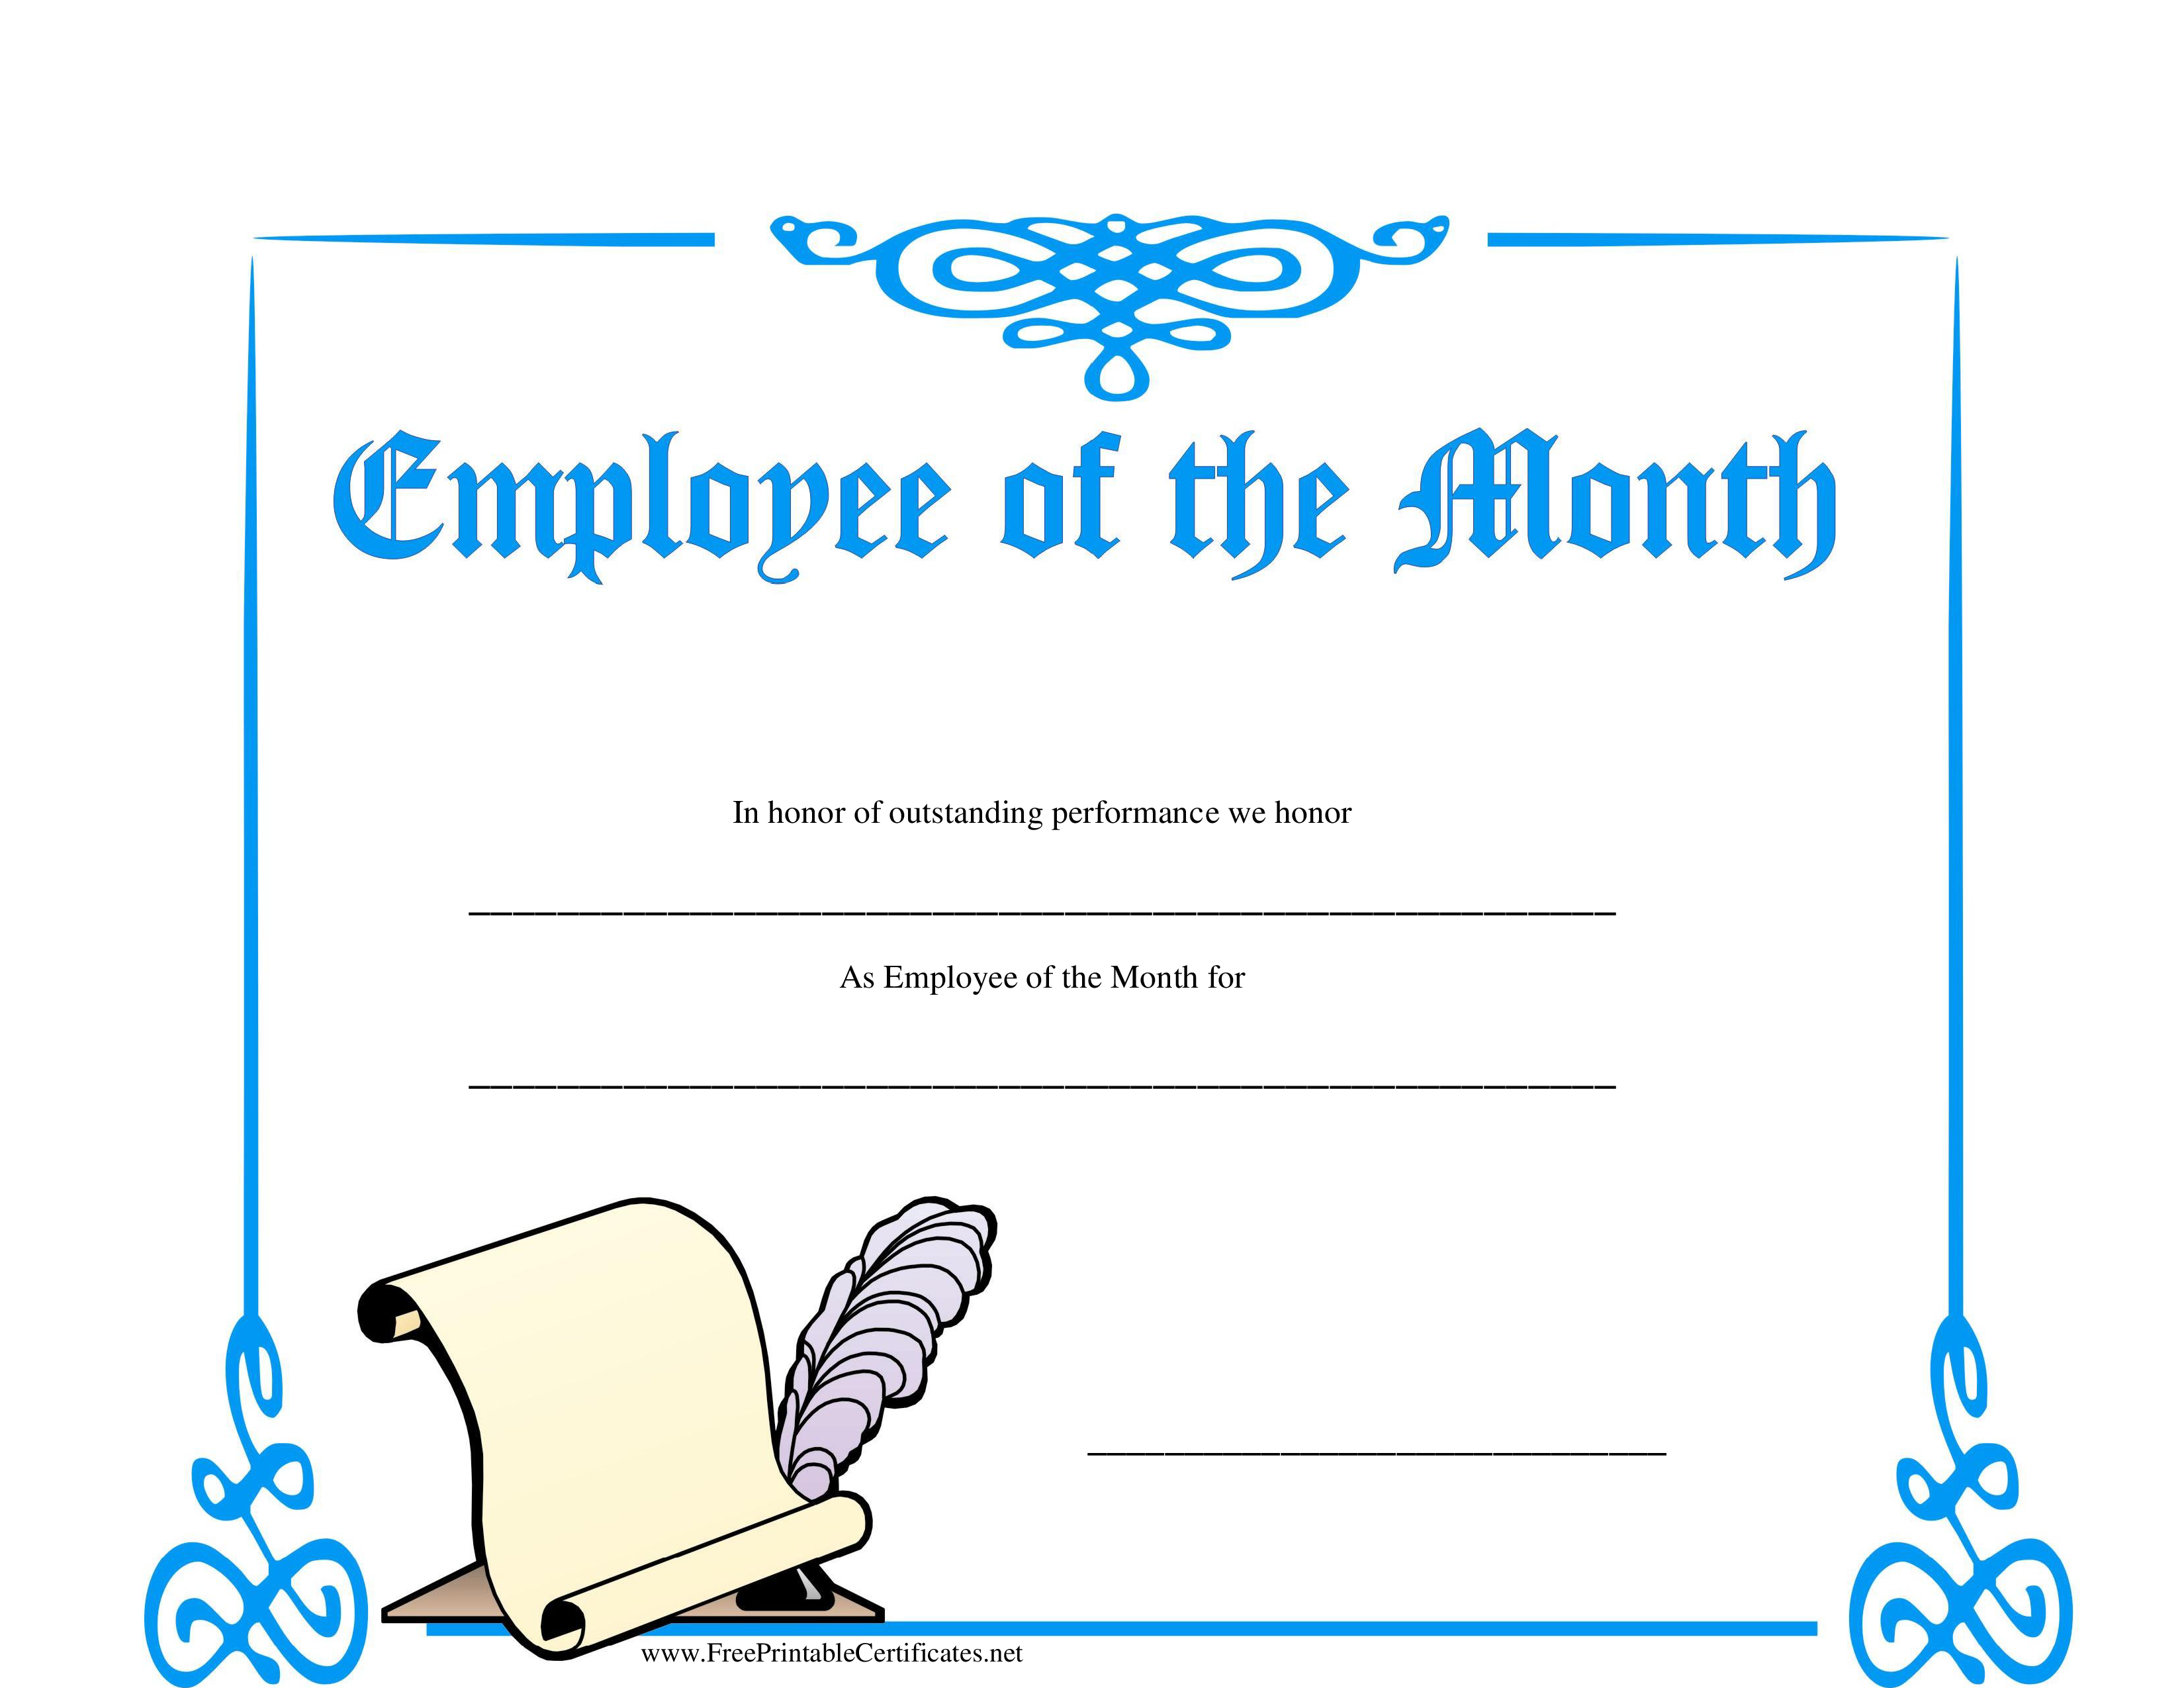 employee of the month certificate modèles